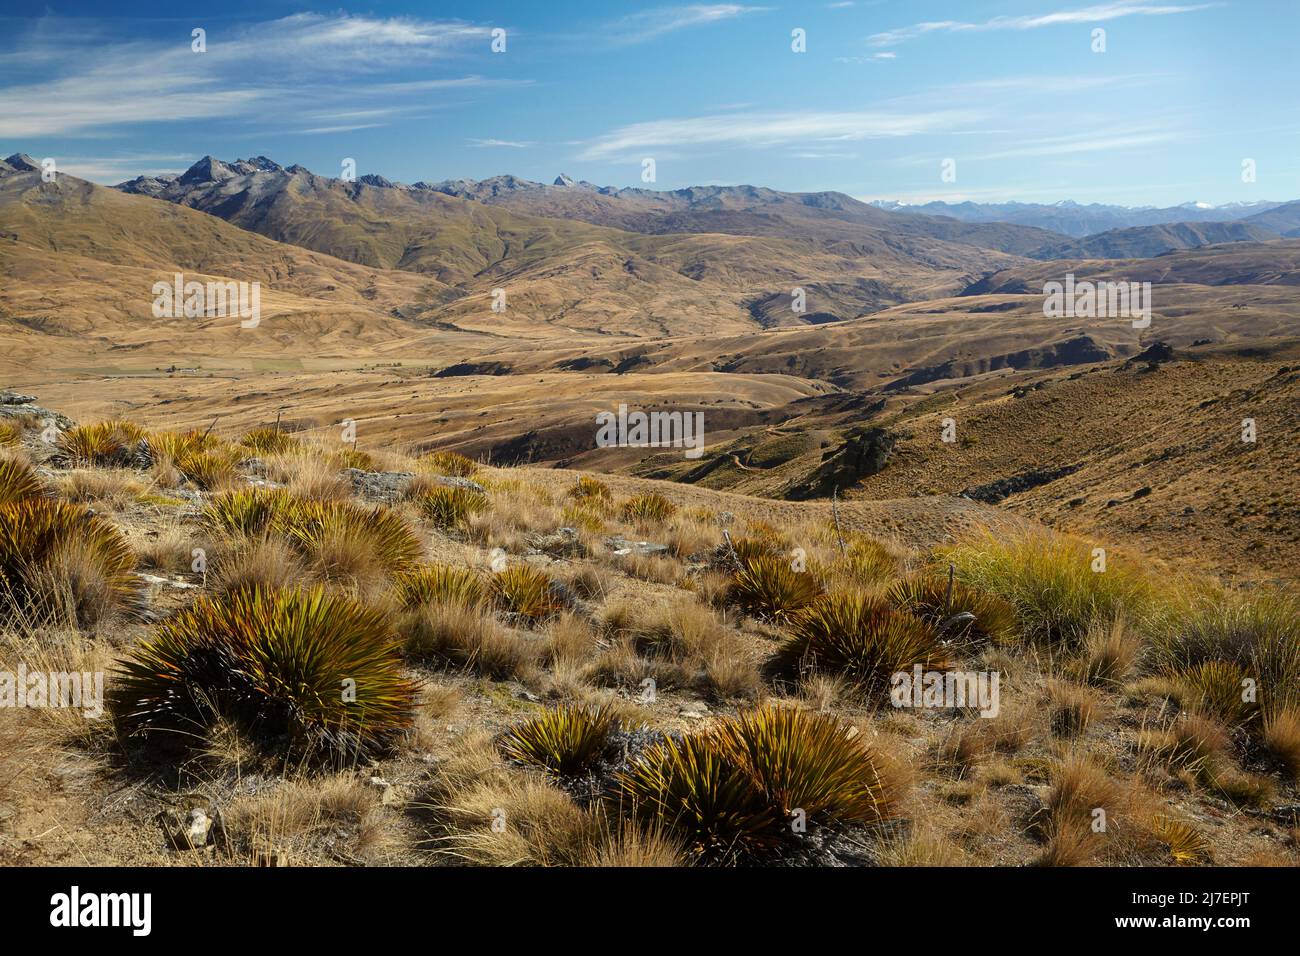 Nevis Valley and Hector Mountains seen from Kopuwai Conservation Area, Old Woman Range, Central Otago, South Island, New Zealand Stock Photo